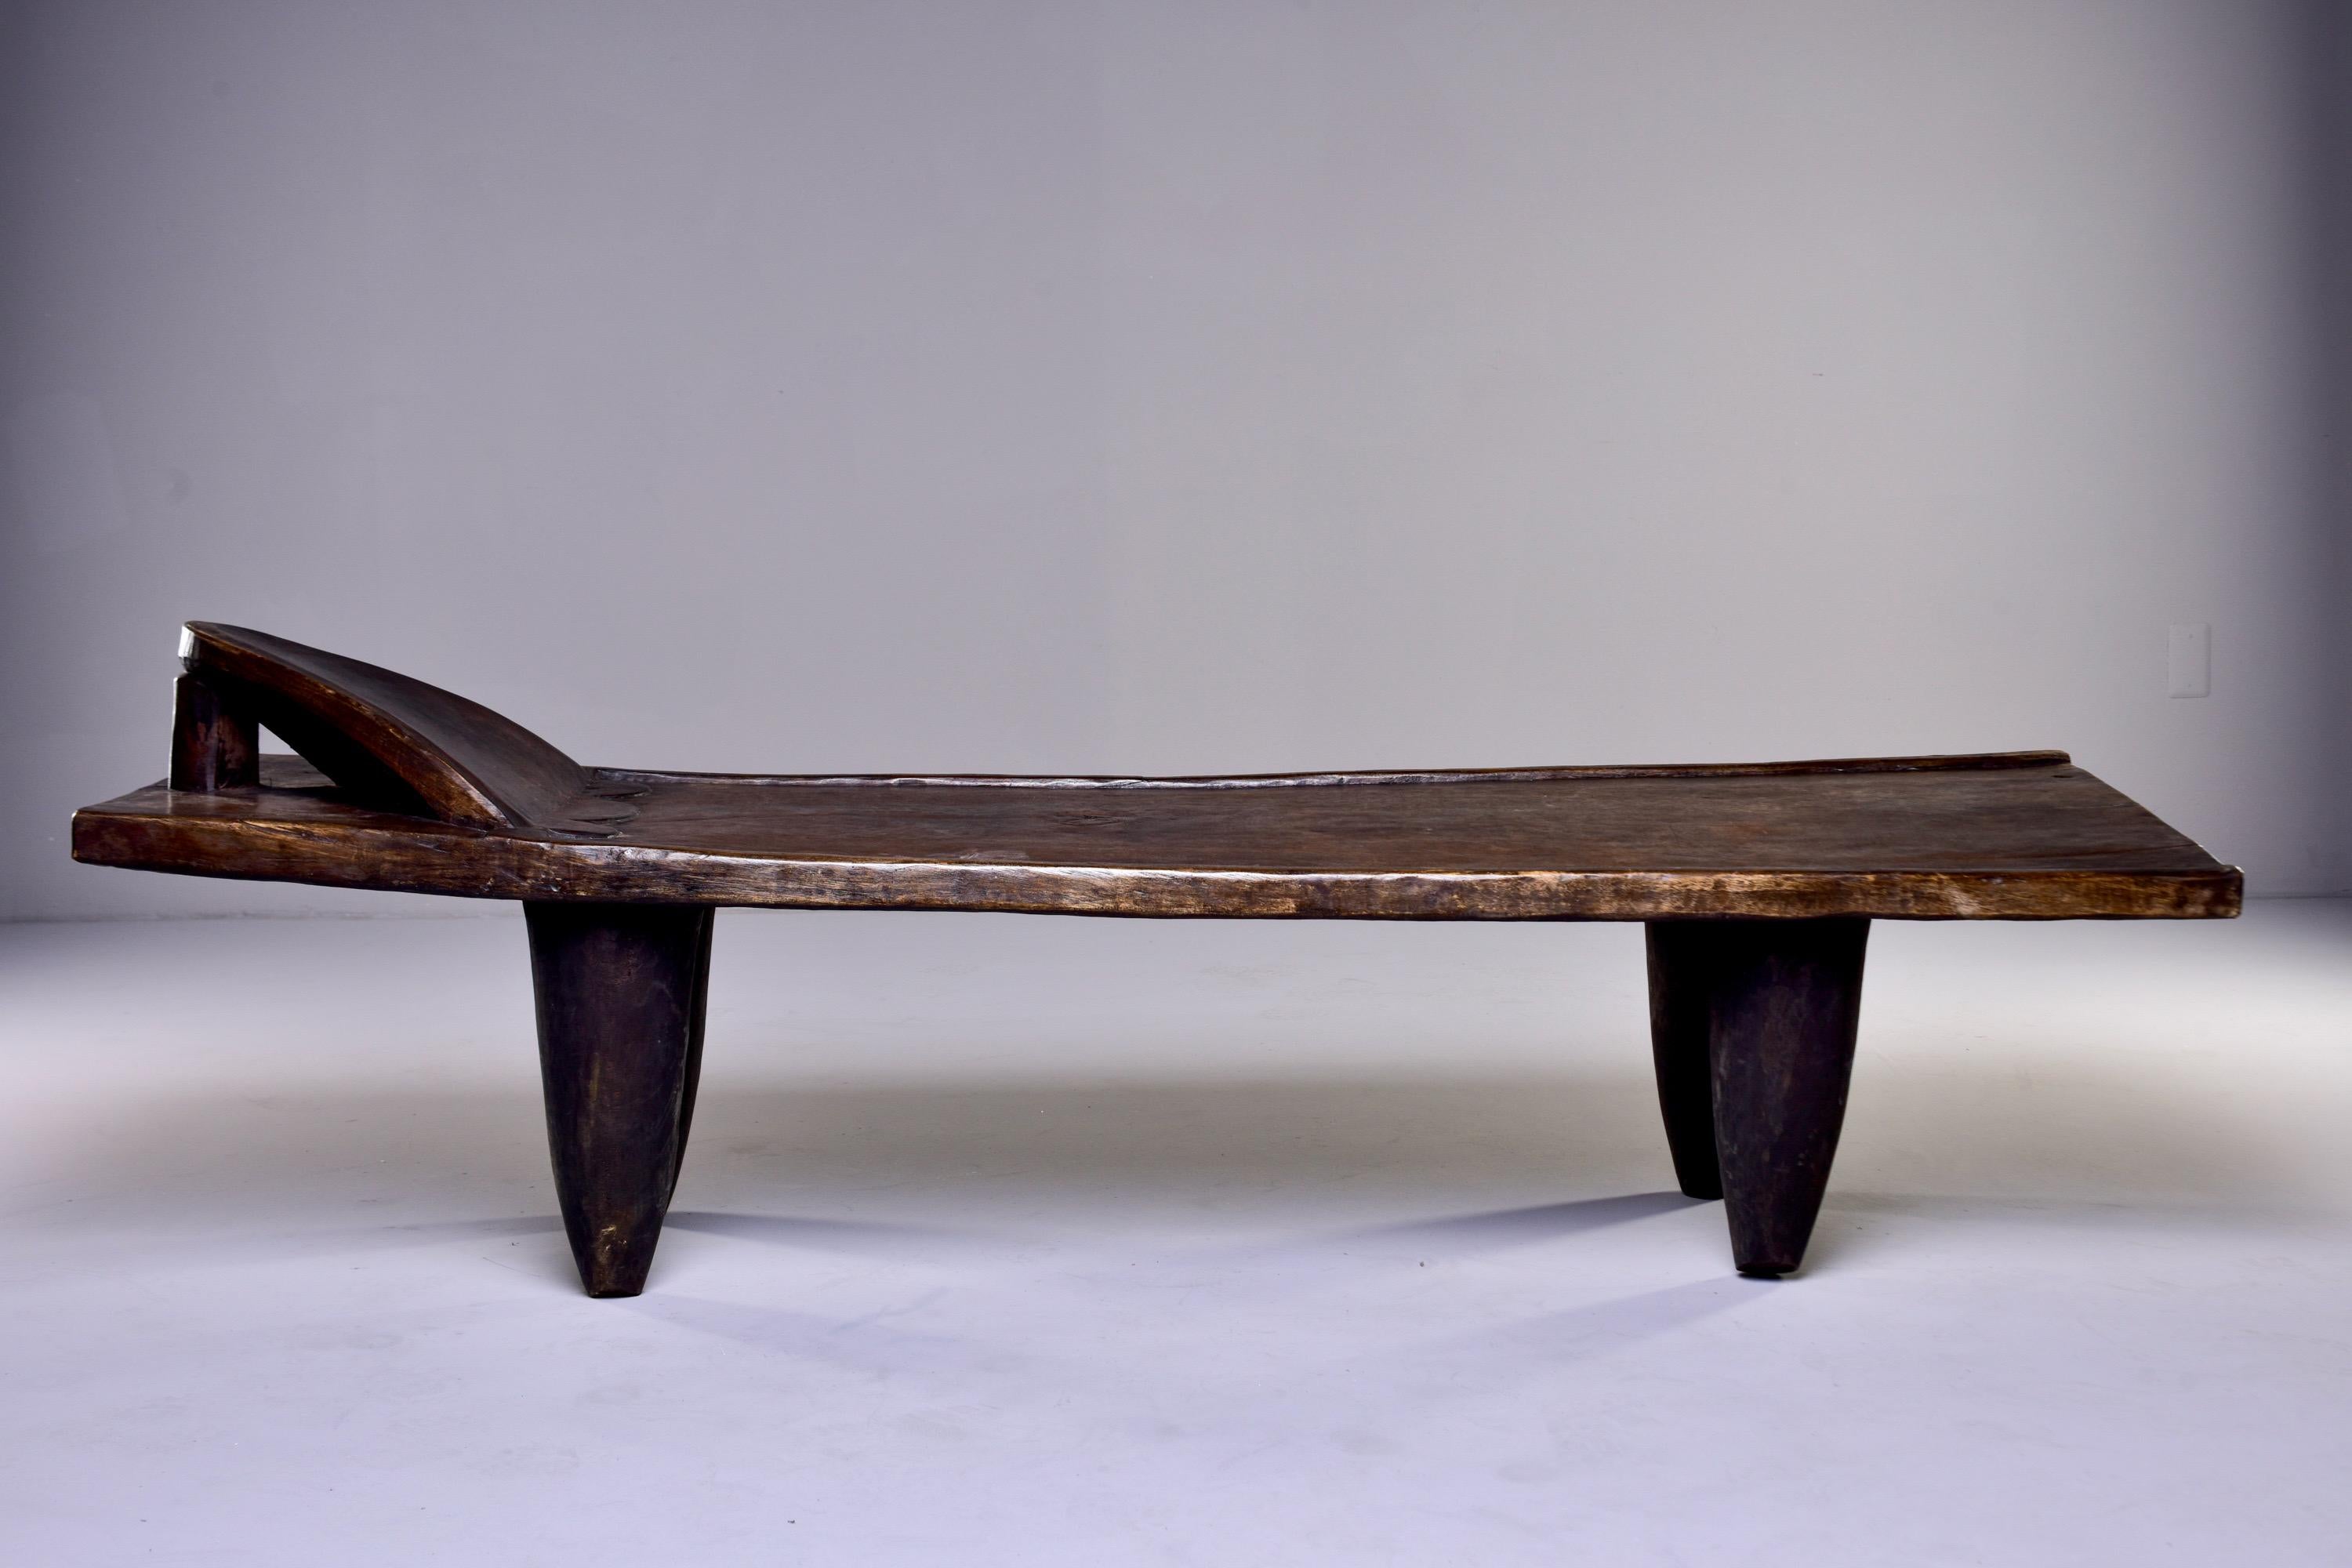 Circa 1980s wooden bench or day bed by the Senufo people of the Ivory Coast. Dark stained hand-carved wood bench has a built in head rest and thick, tapered legs.

Handcrafted by the Senufo Tribe of Northern Cote d'Ivoire.

18” high at